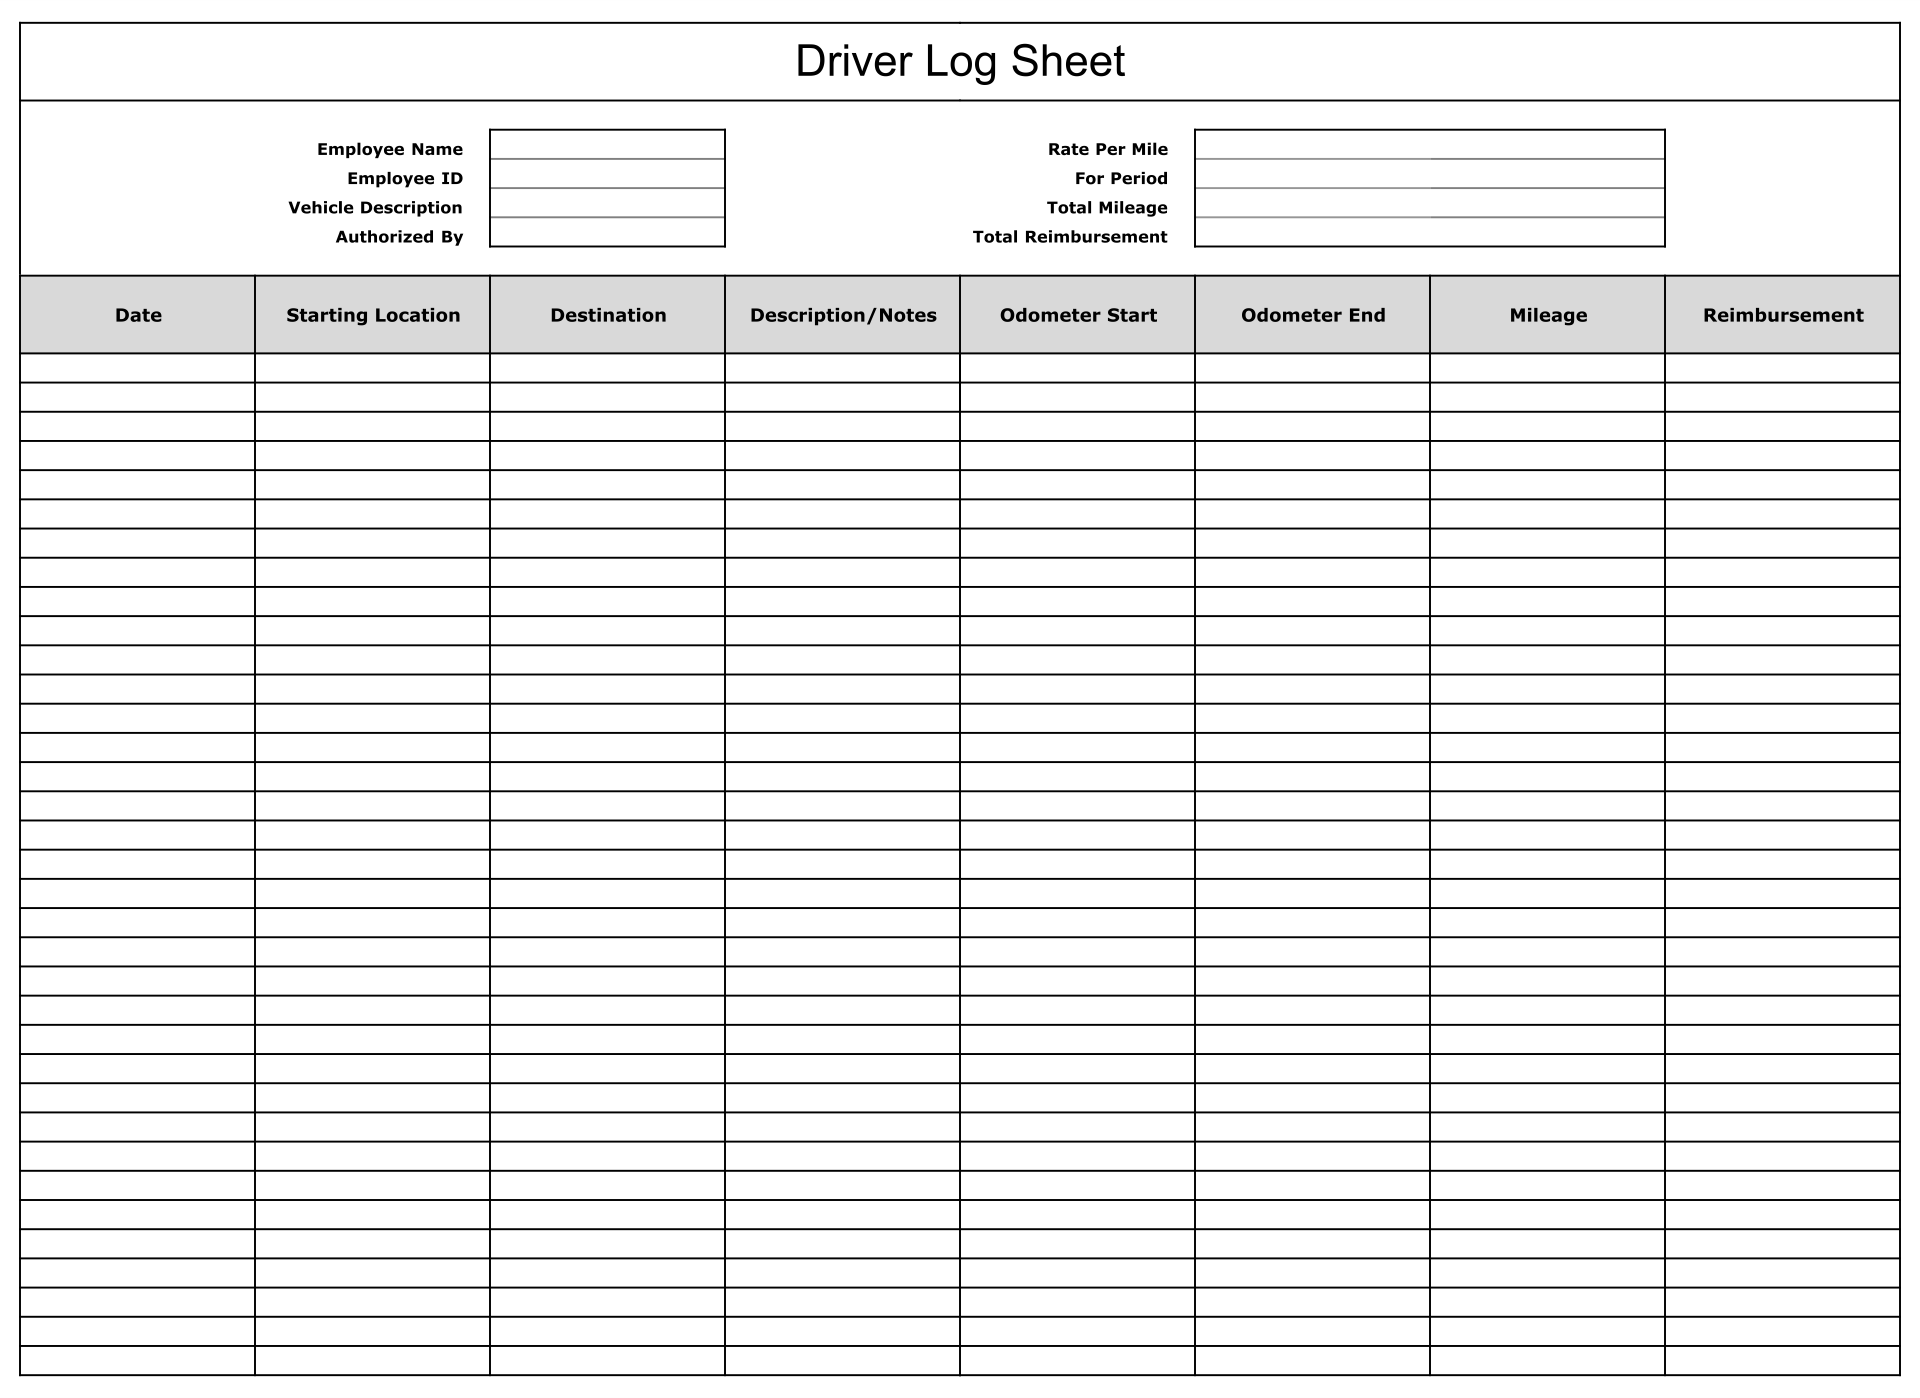 Driver Log Sheet Template Awesome Design Layout Templates